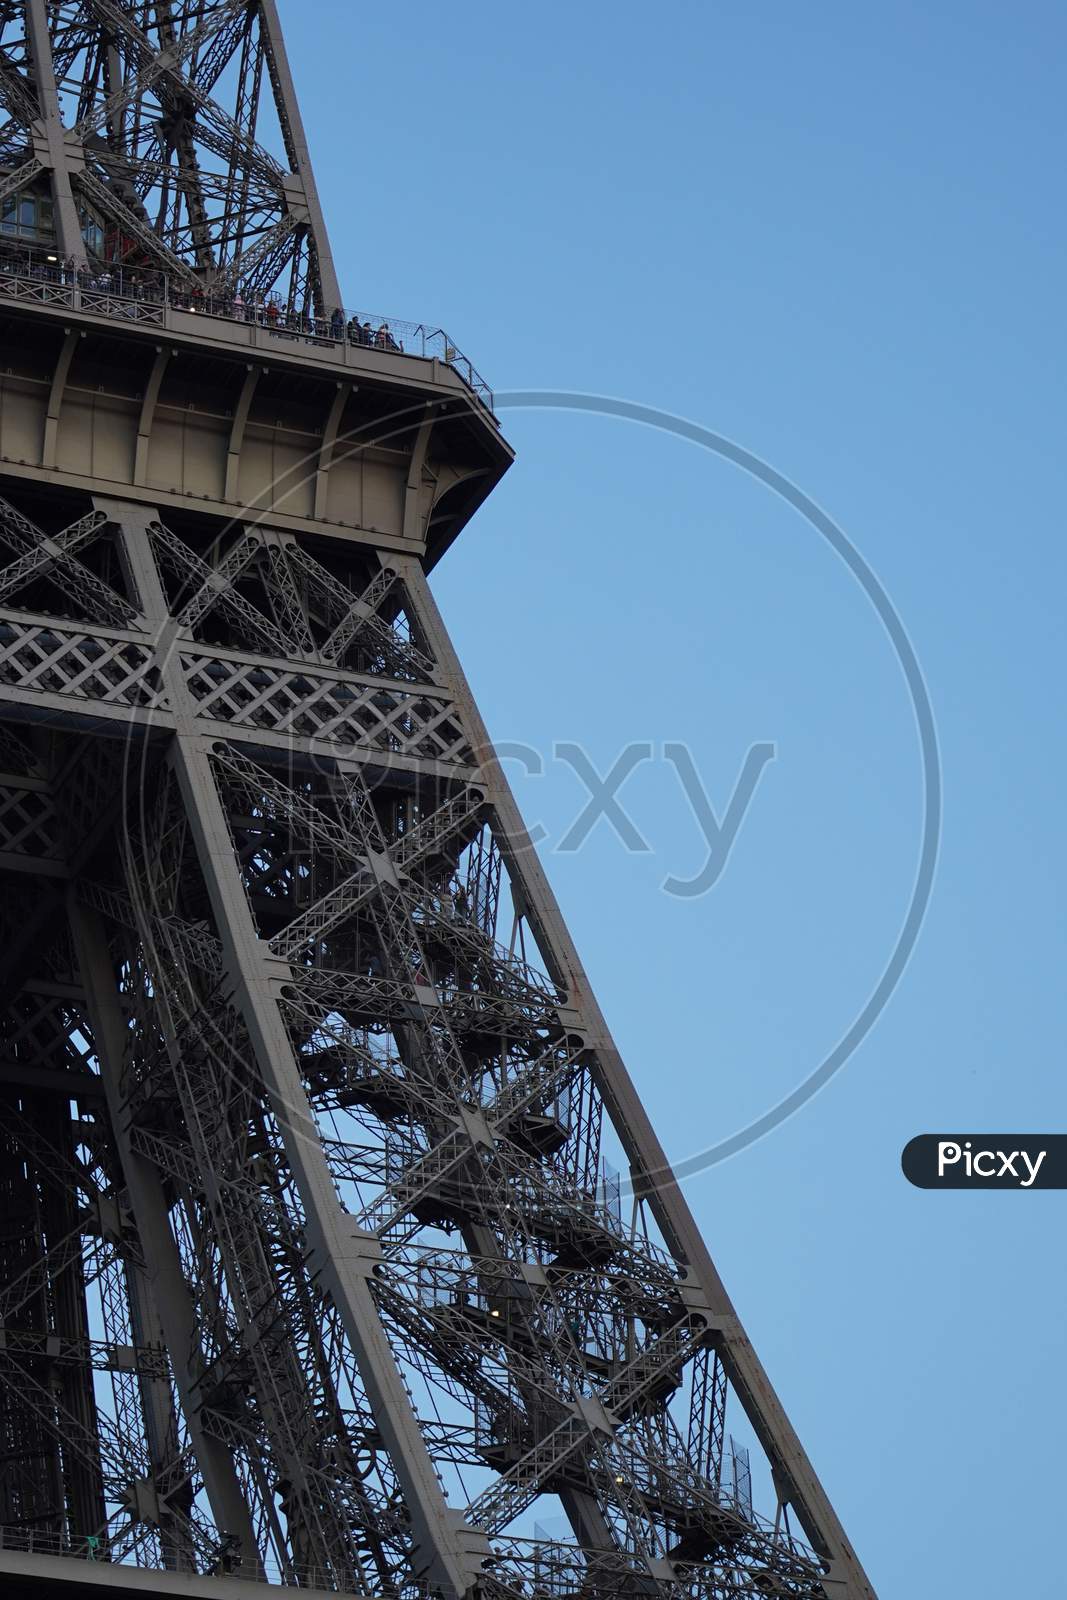 Close-up of The Eiffel Tower after sunset. Paris, 31 may 2019 in France.